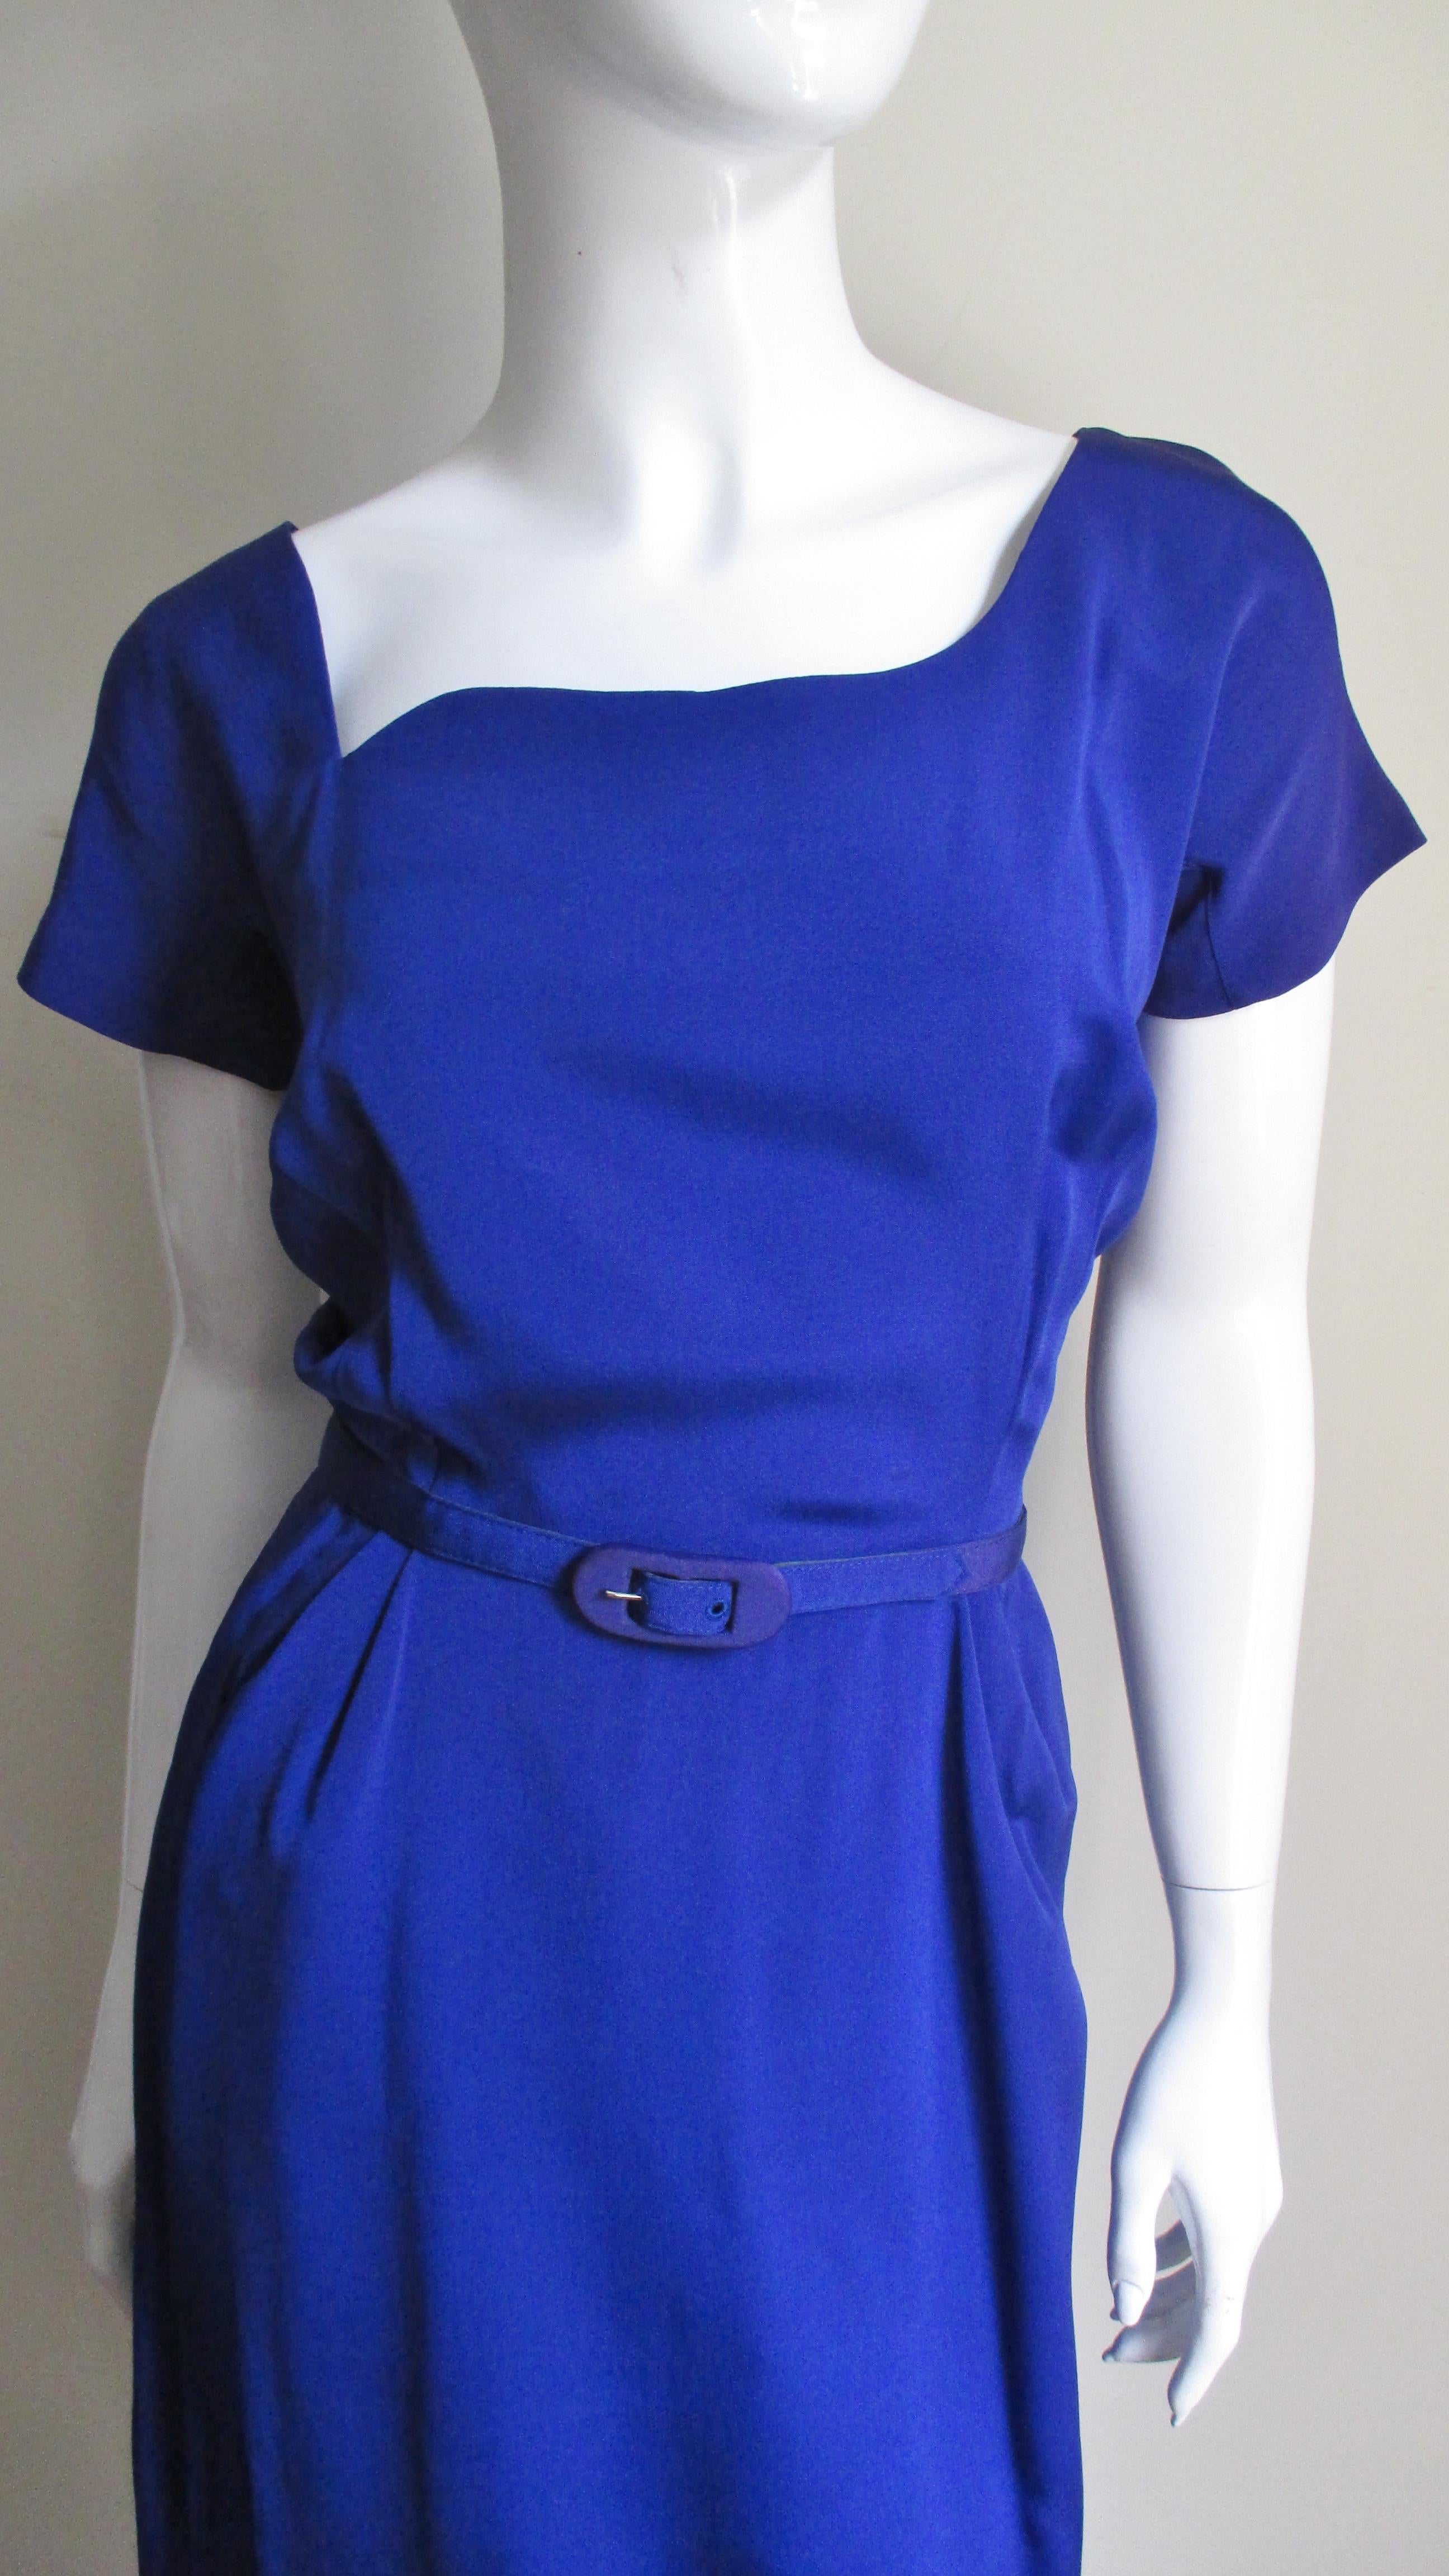 A rare unworn 1940s dress in purple silk from Lilli Ann.  It has an asymmetrical front neckline with a V in back, short sleeves and a straight skirt with a back kick pleat.  The dress comes with a matching belt, is fully lined and closes in the back